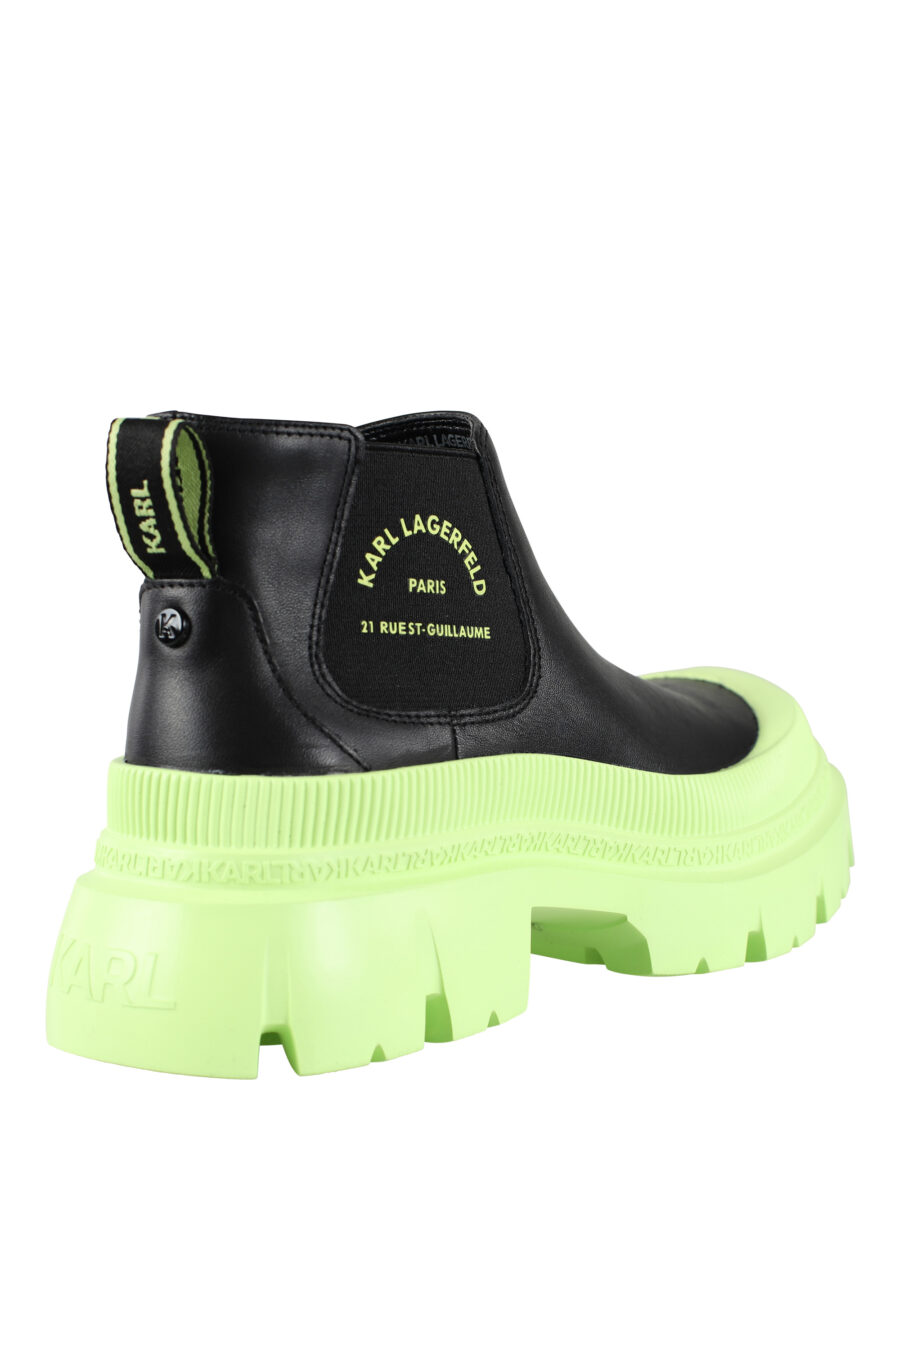 Black ankle boots with logo and lime green sole - IMG 9591